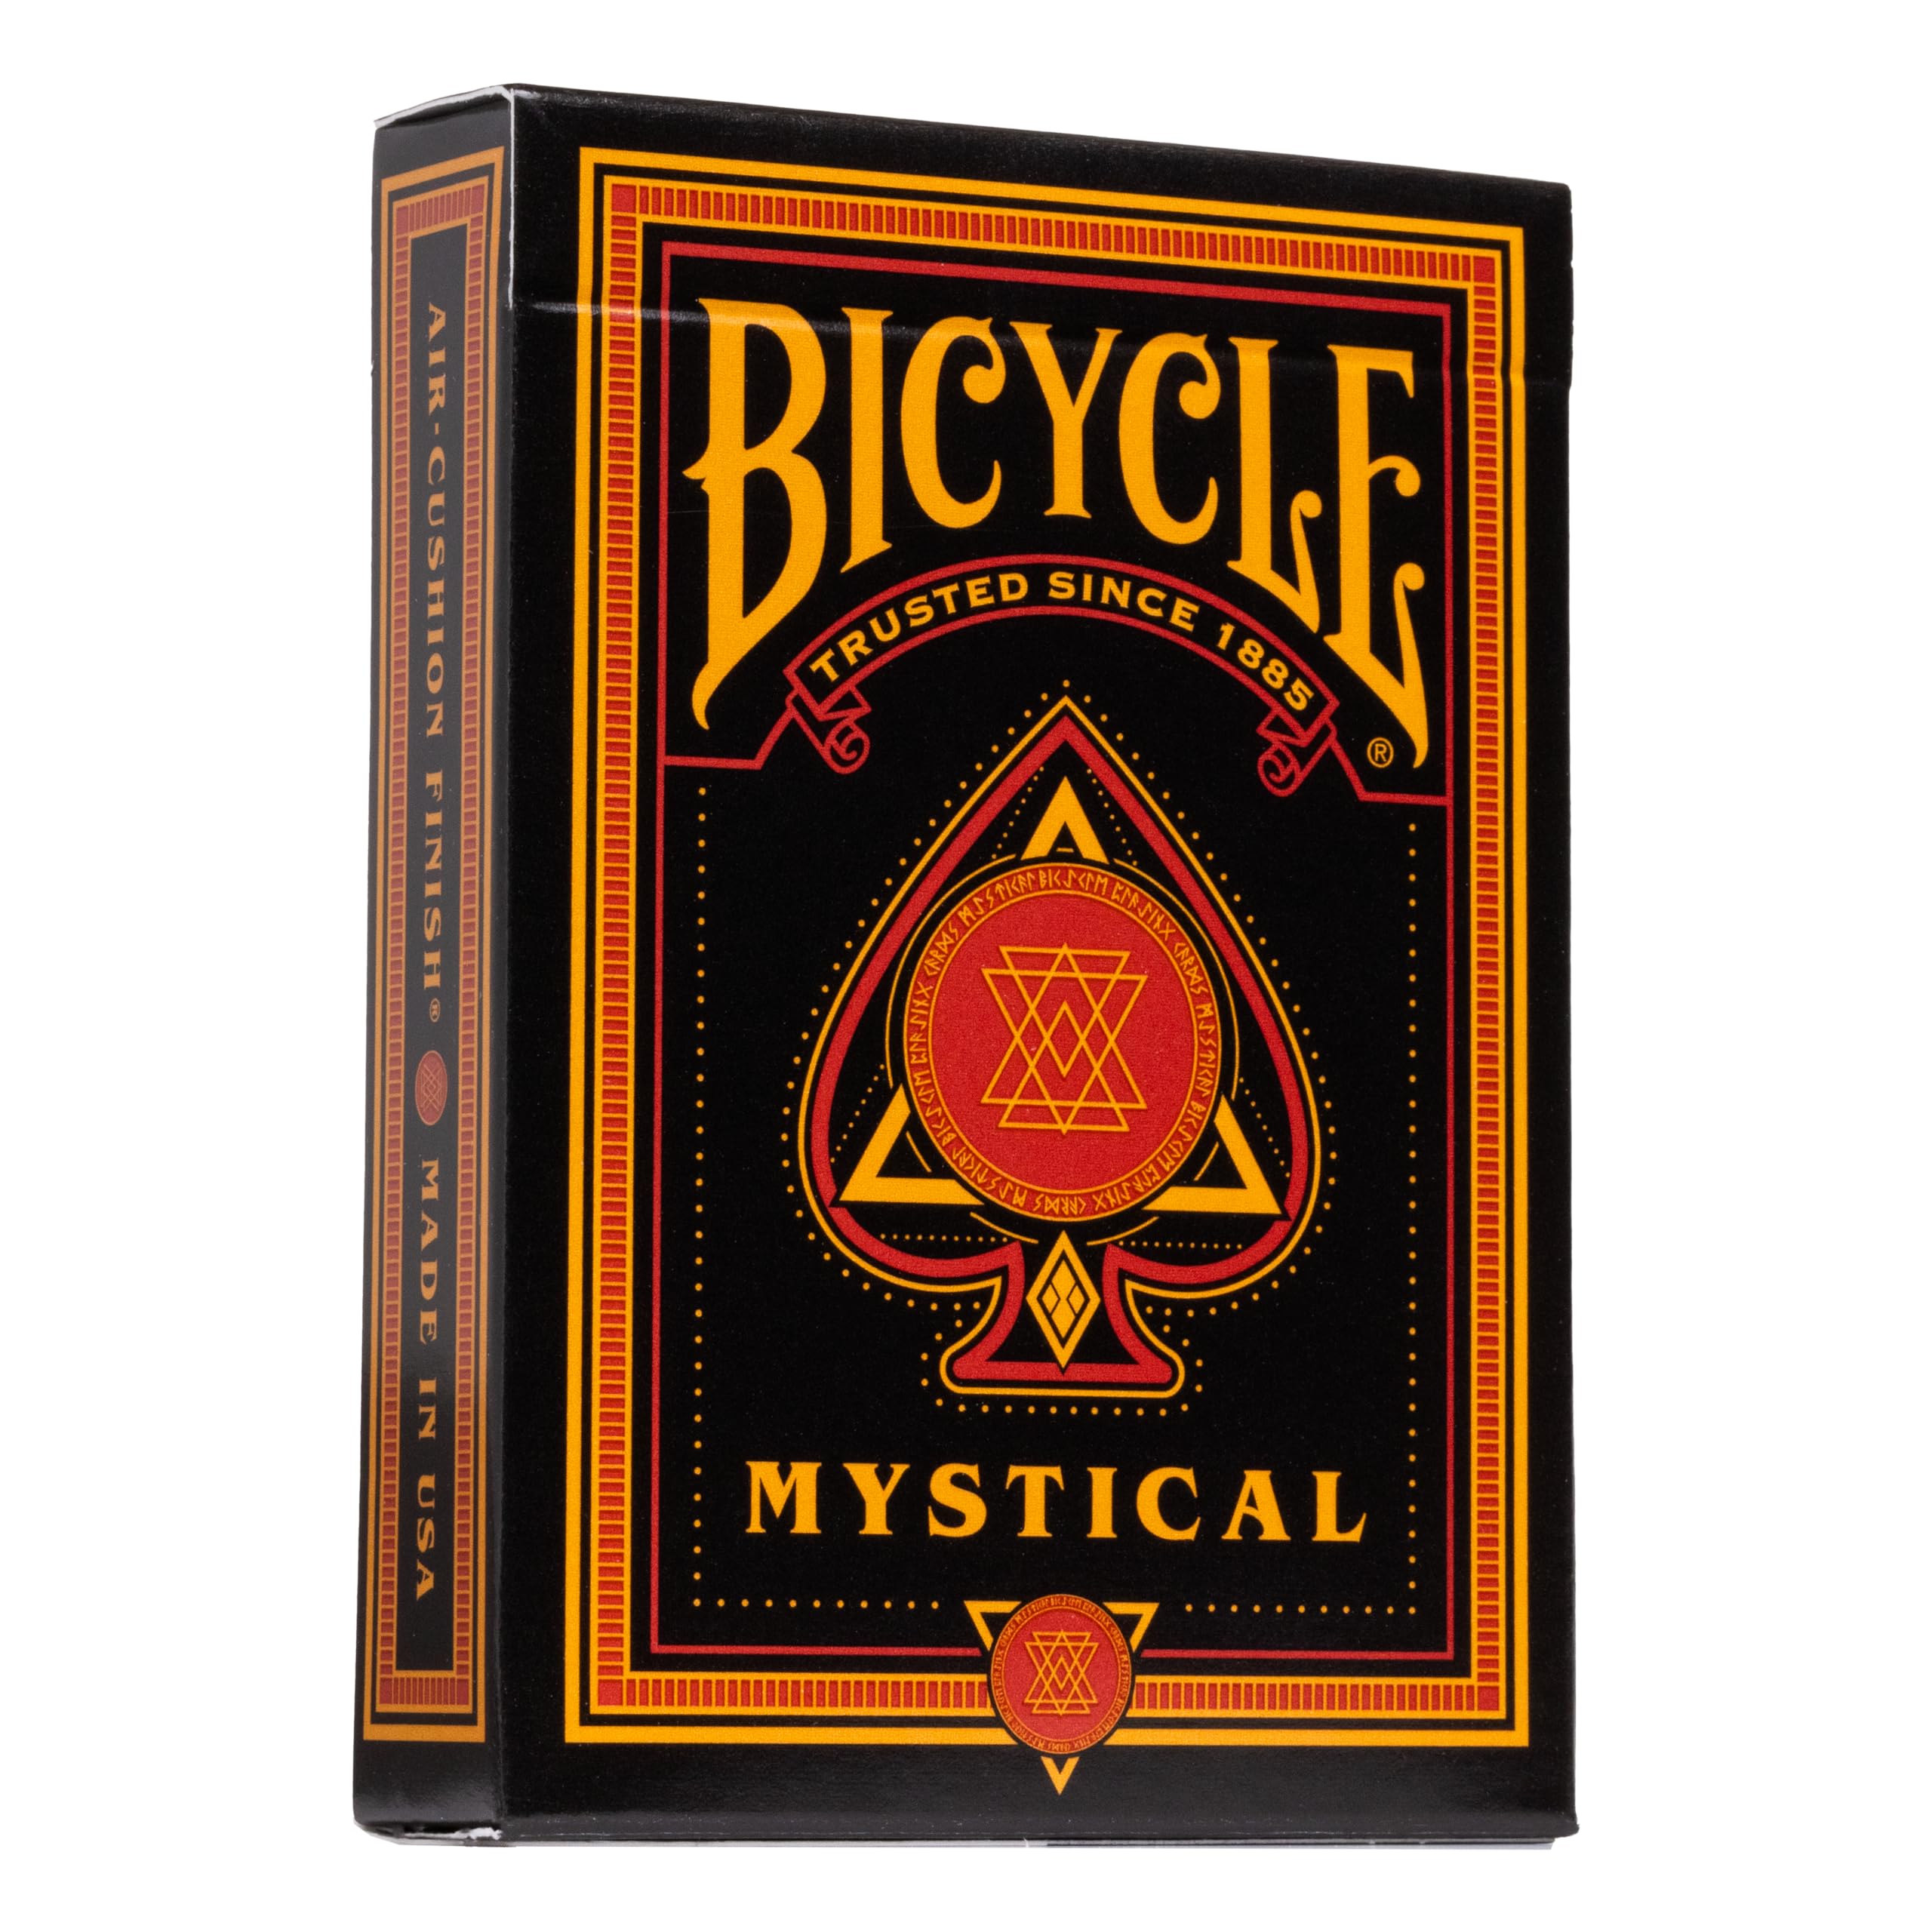 Bicycle Mystical Magical Playing Cards - Premium Deck for Magic and Card Games - Poker Size